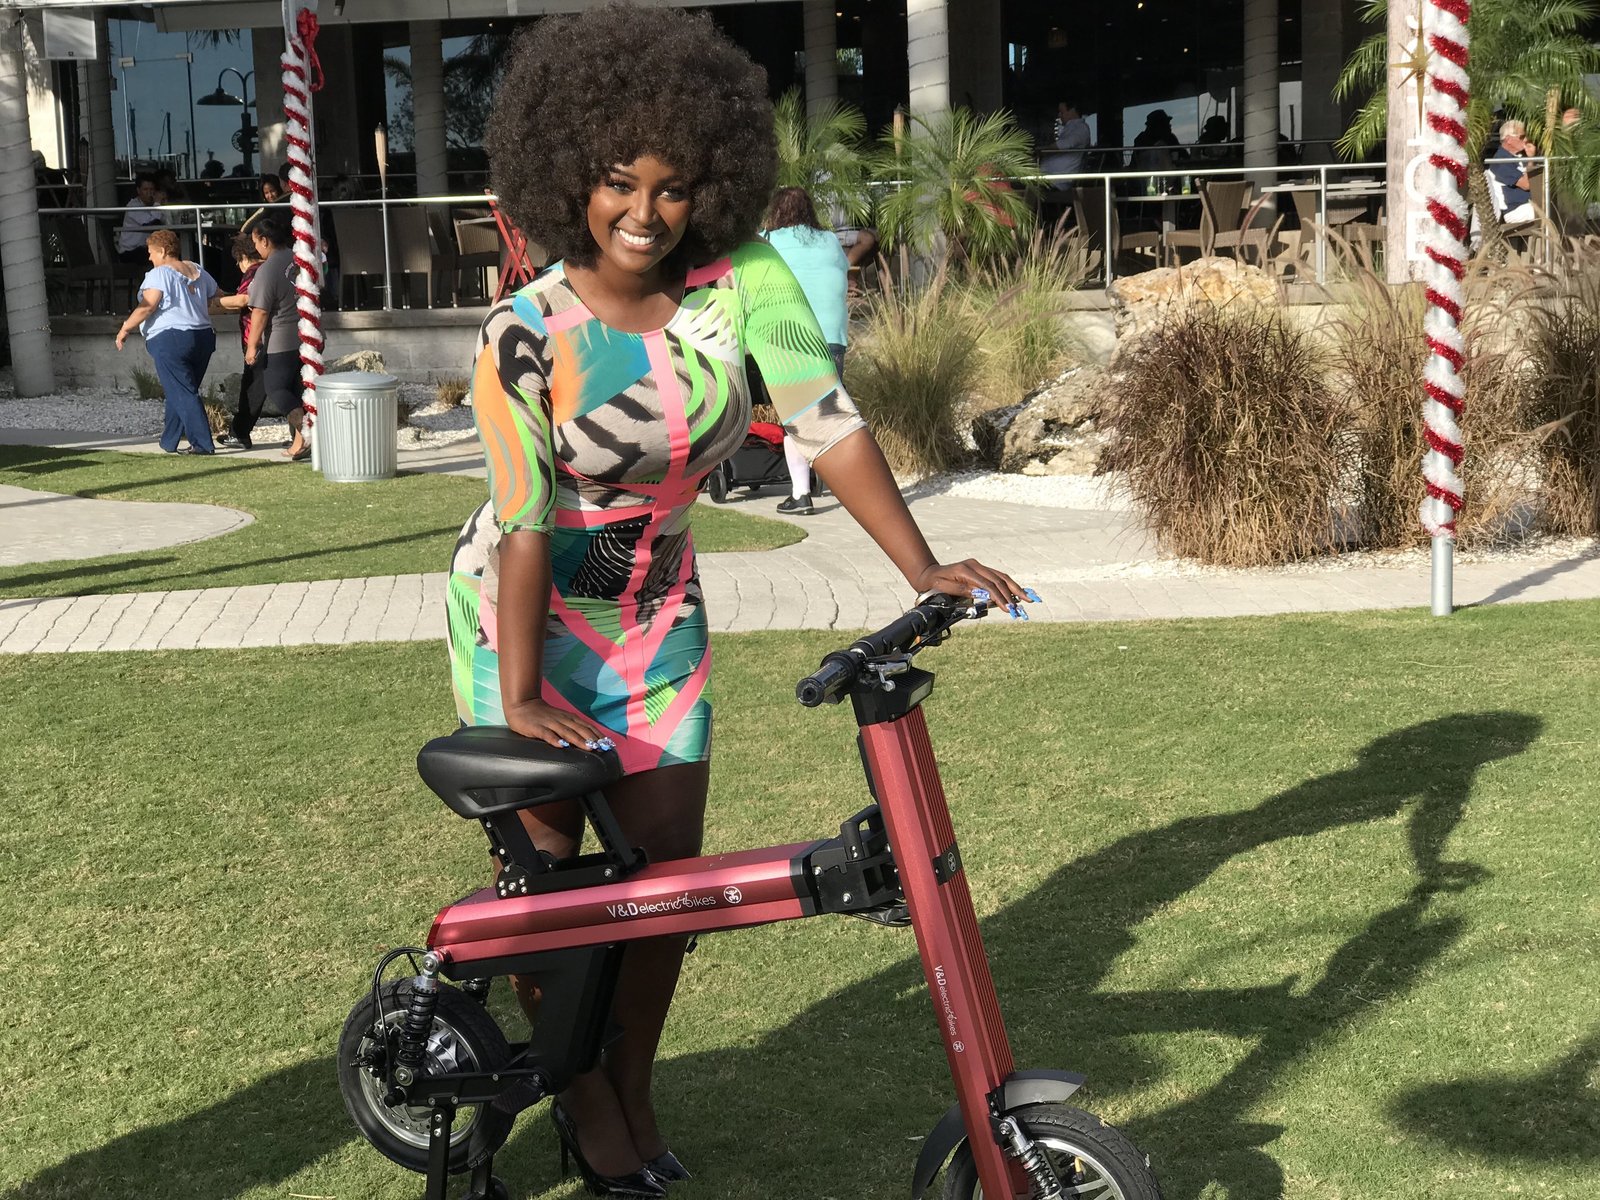 Actress and singer from Love & Hip Hop Amara La Negra is promoting the Red Go-Bike M2